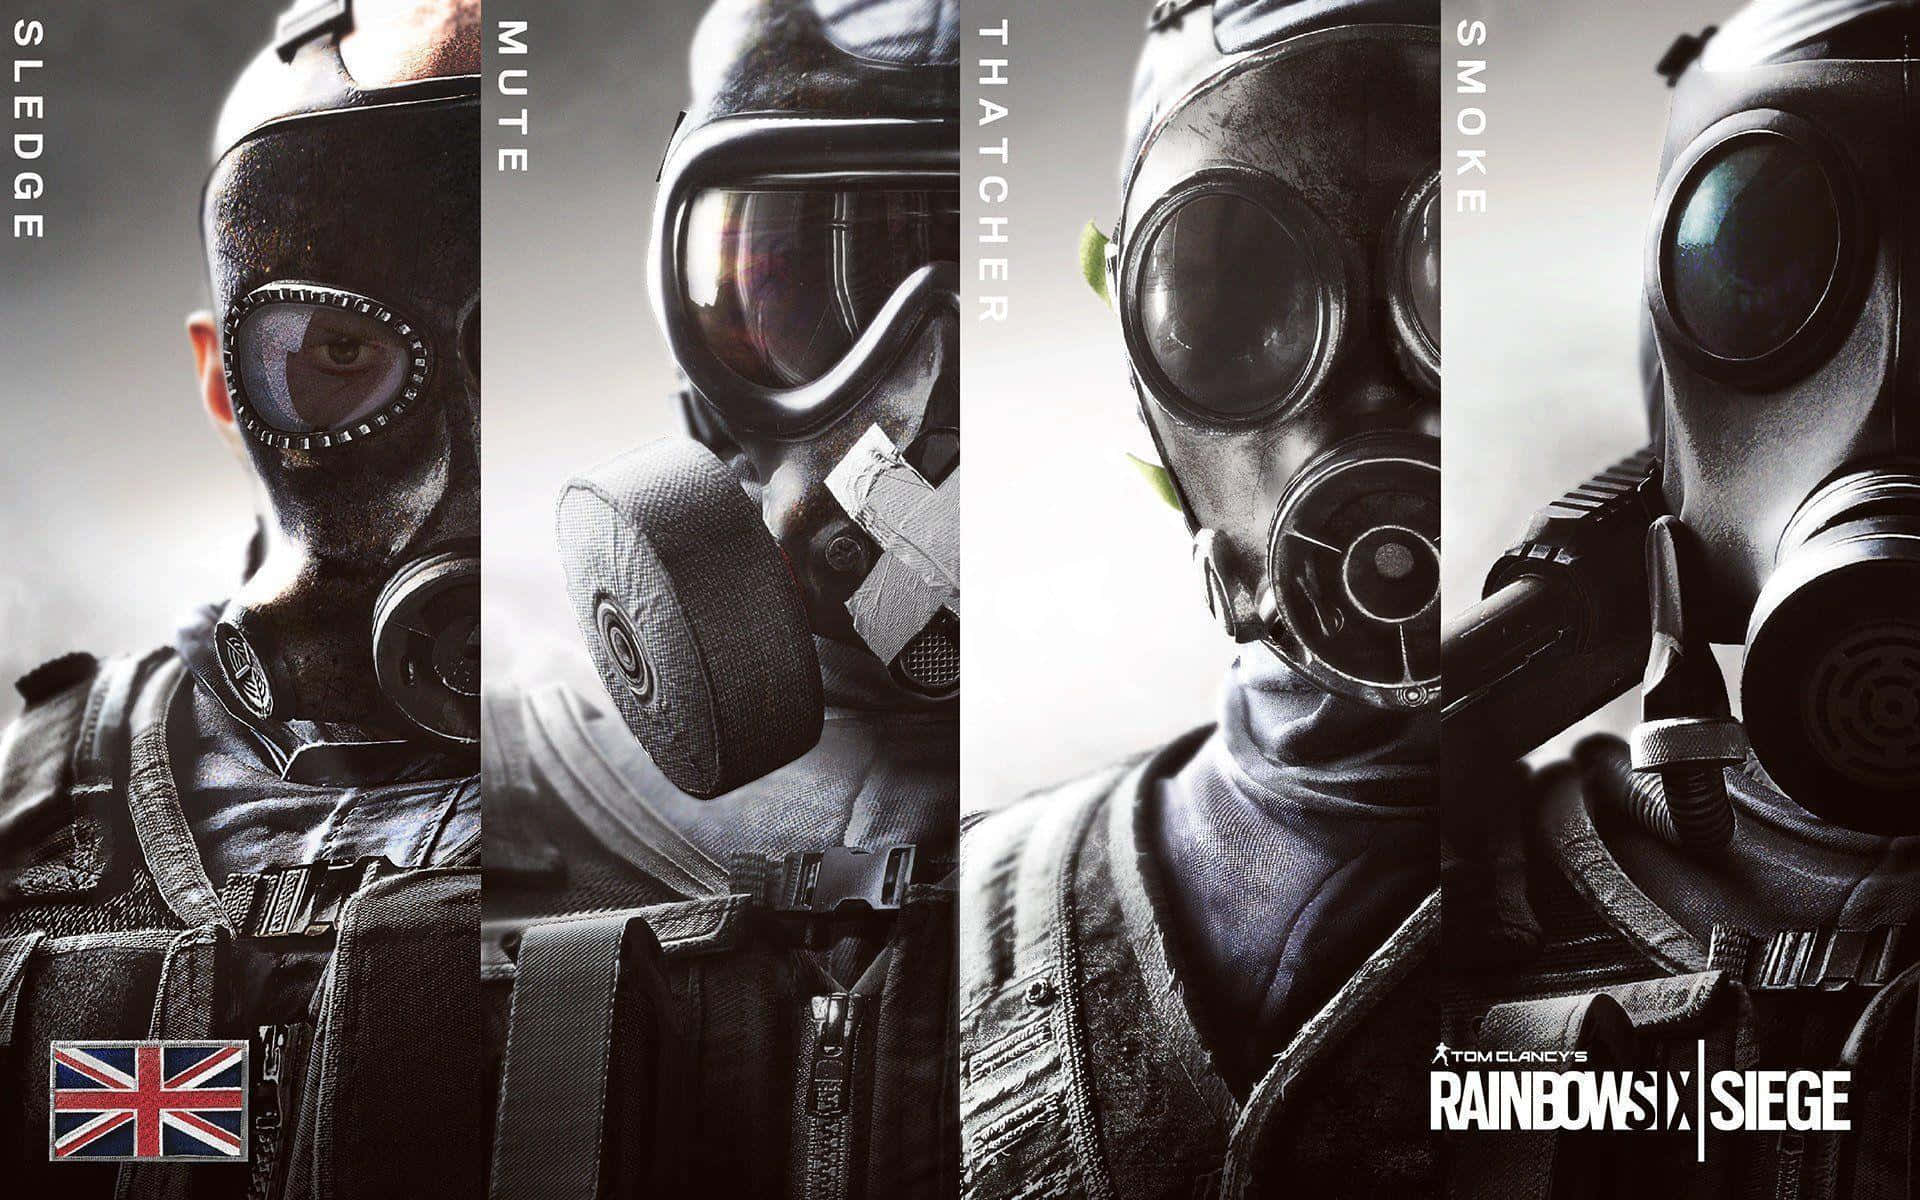 Feel the intensity of the Tom Clancys Rainbow Six Siege game! Wallpaper